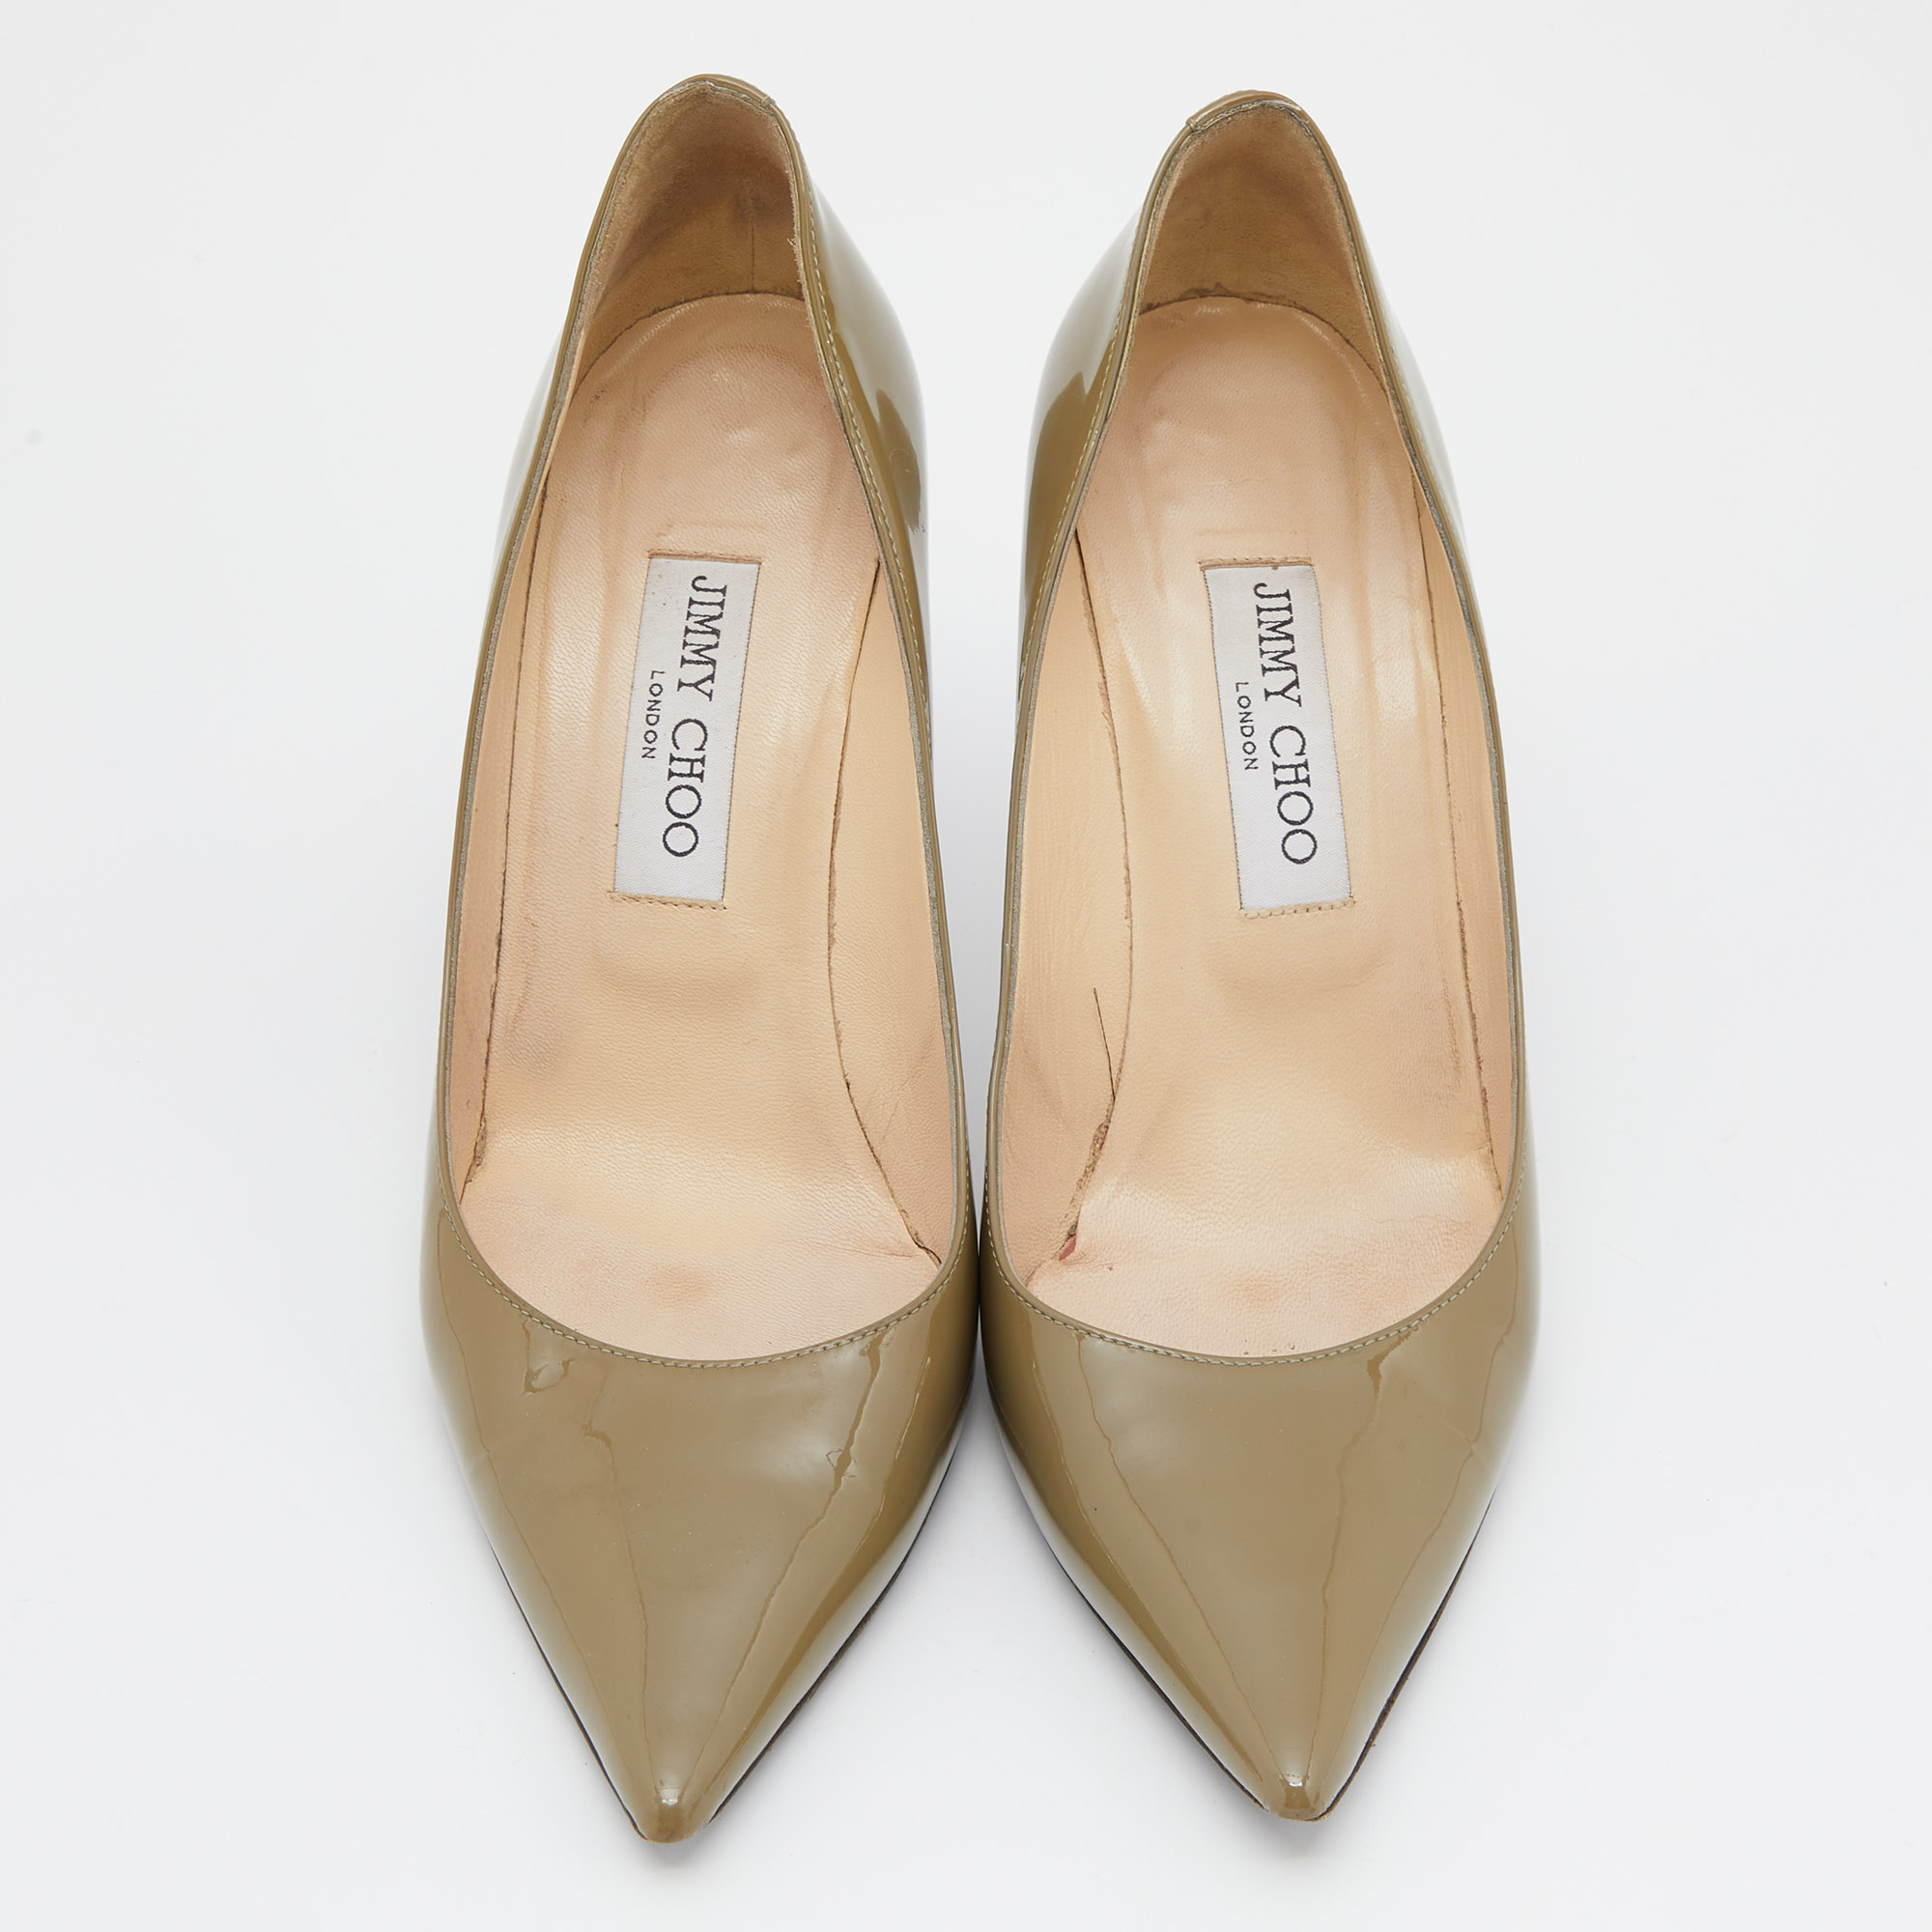 Jimmy Choo Olive Green Patent Leather Love Pumps Size 39